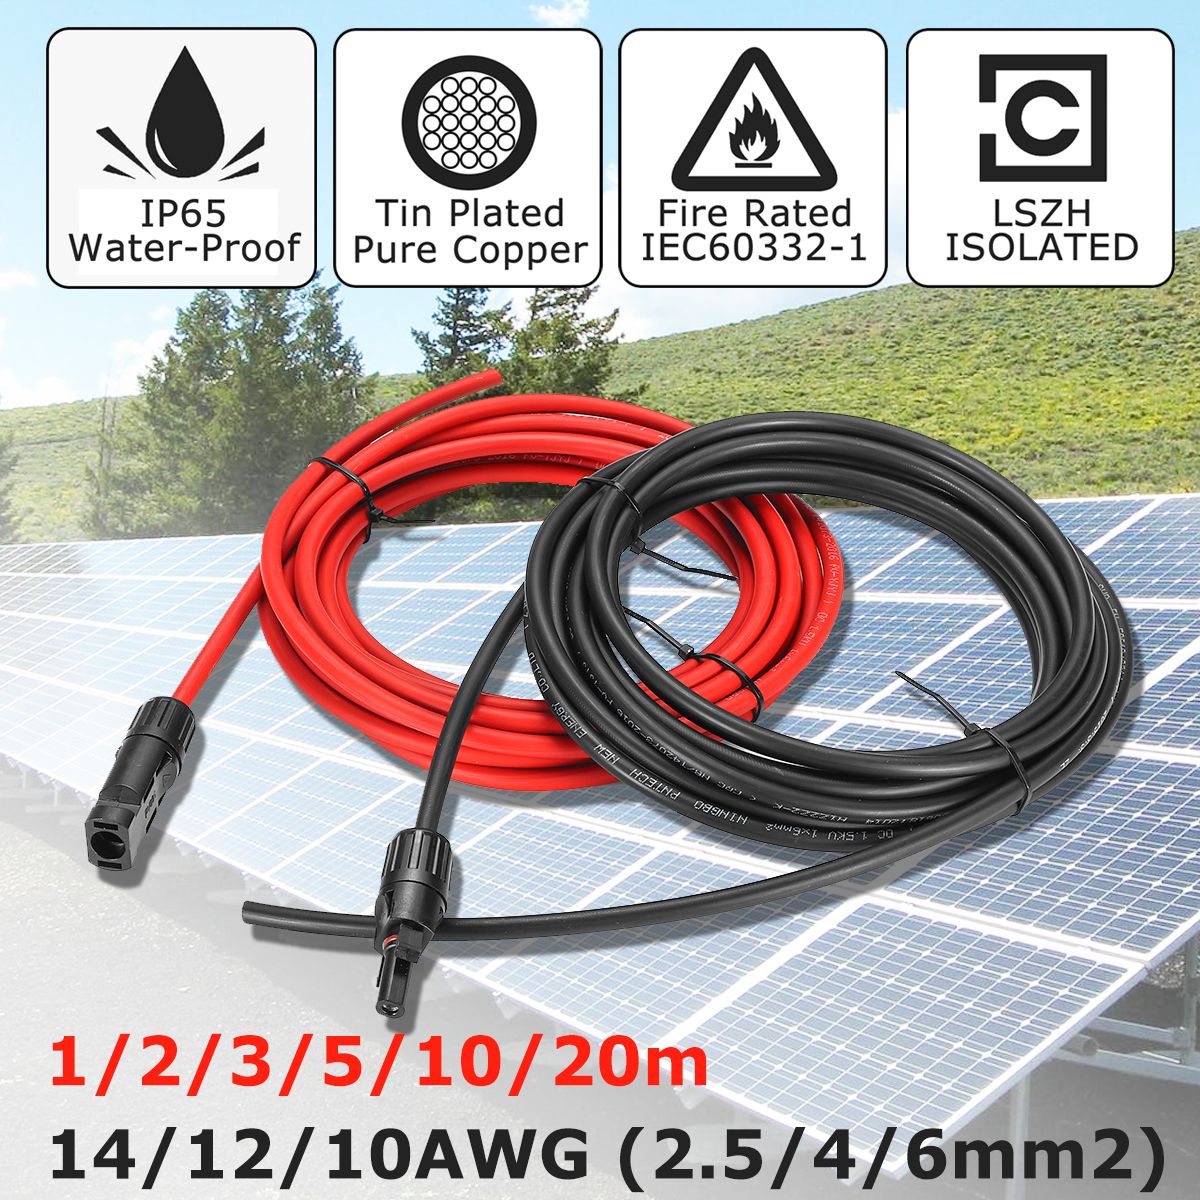 60A-1235M-6mmsup2-10AWG-Eternal-69mm-Solar-Panel-Extension-Cable-Wire-MC4-Connector-Copper-Wire-Sola-1479417